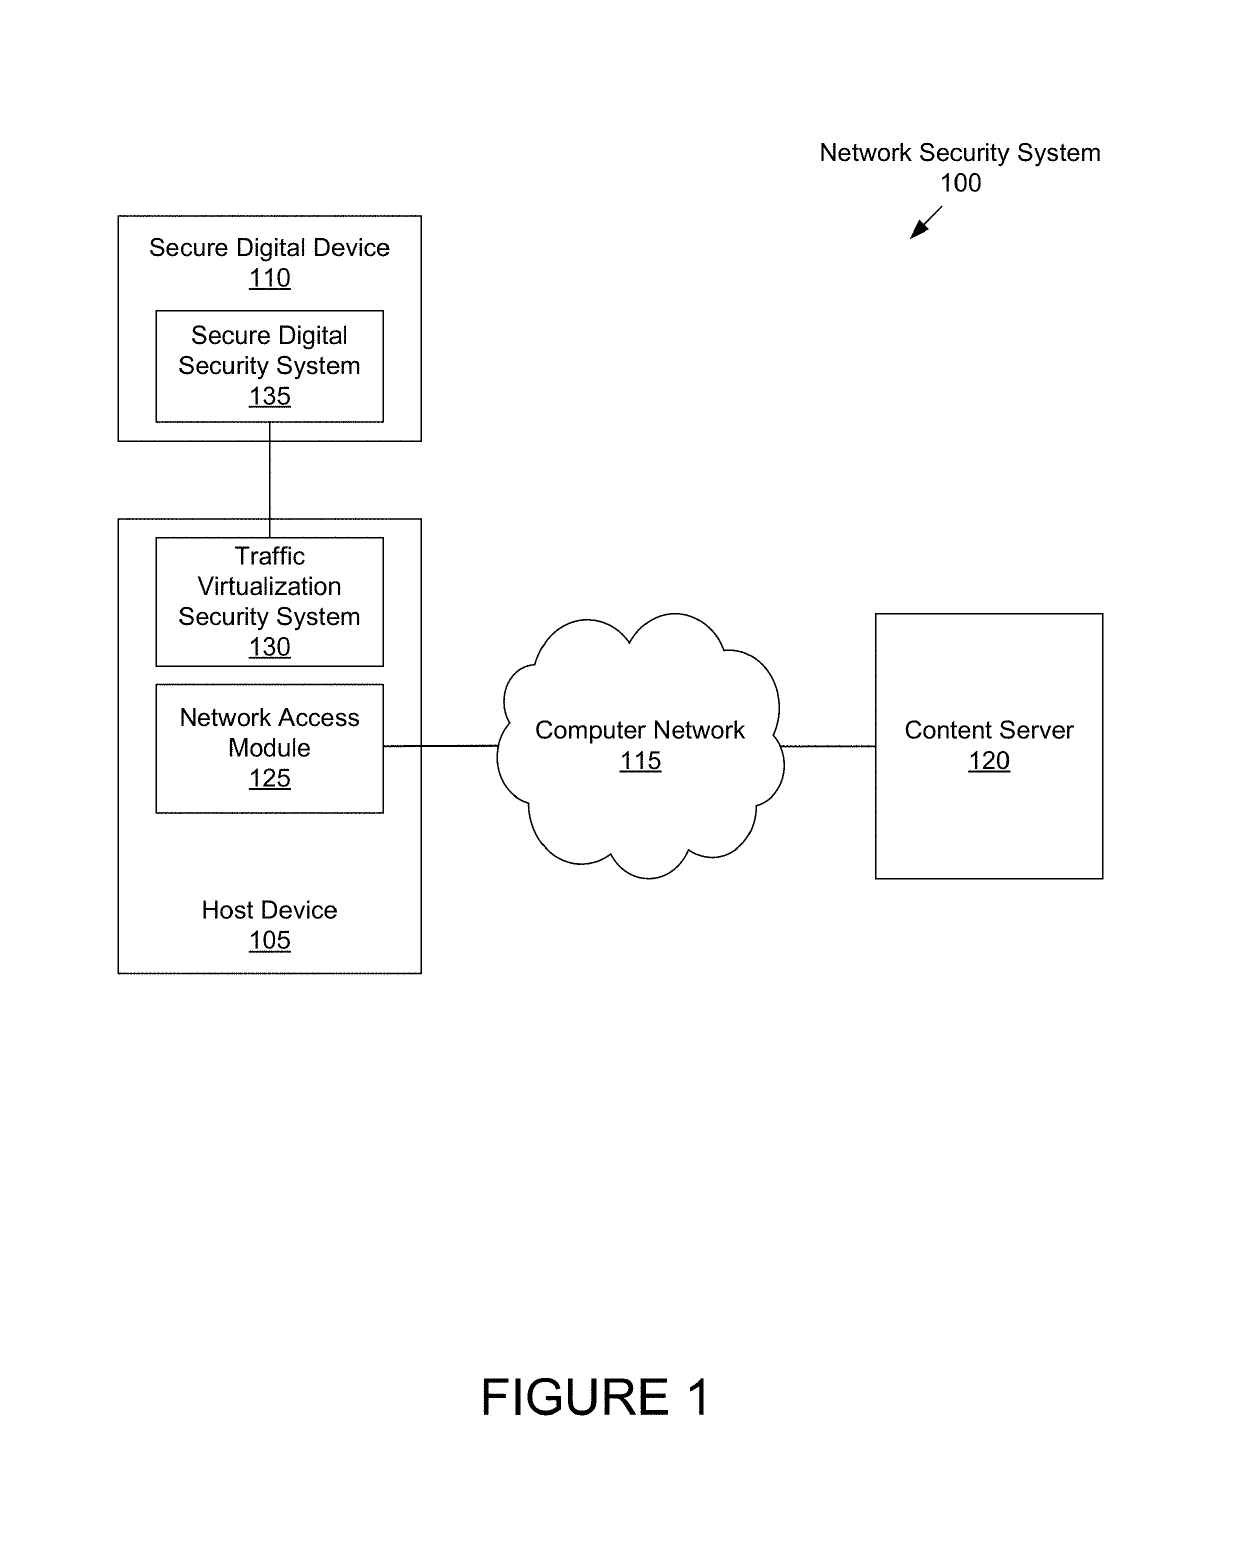 Systems and methods for providing network security using a secure digital device